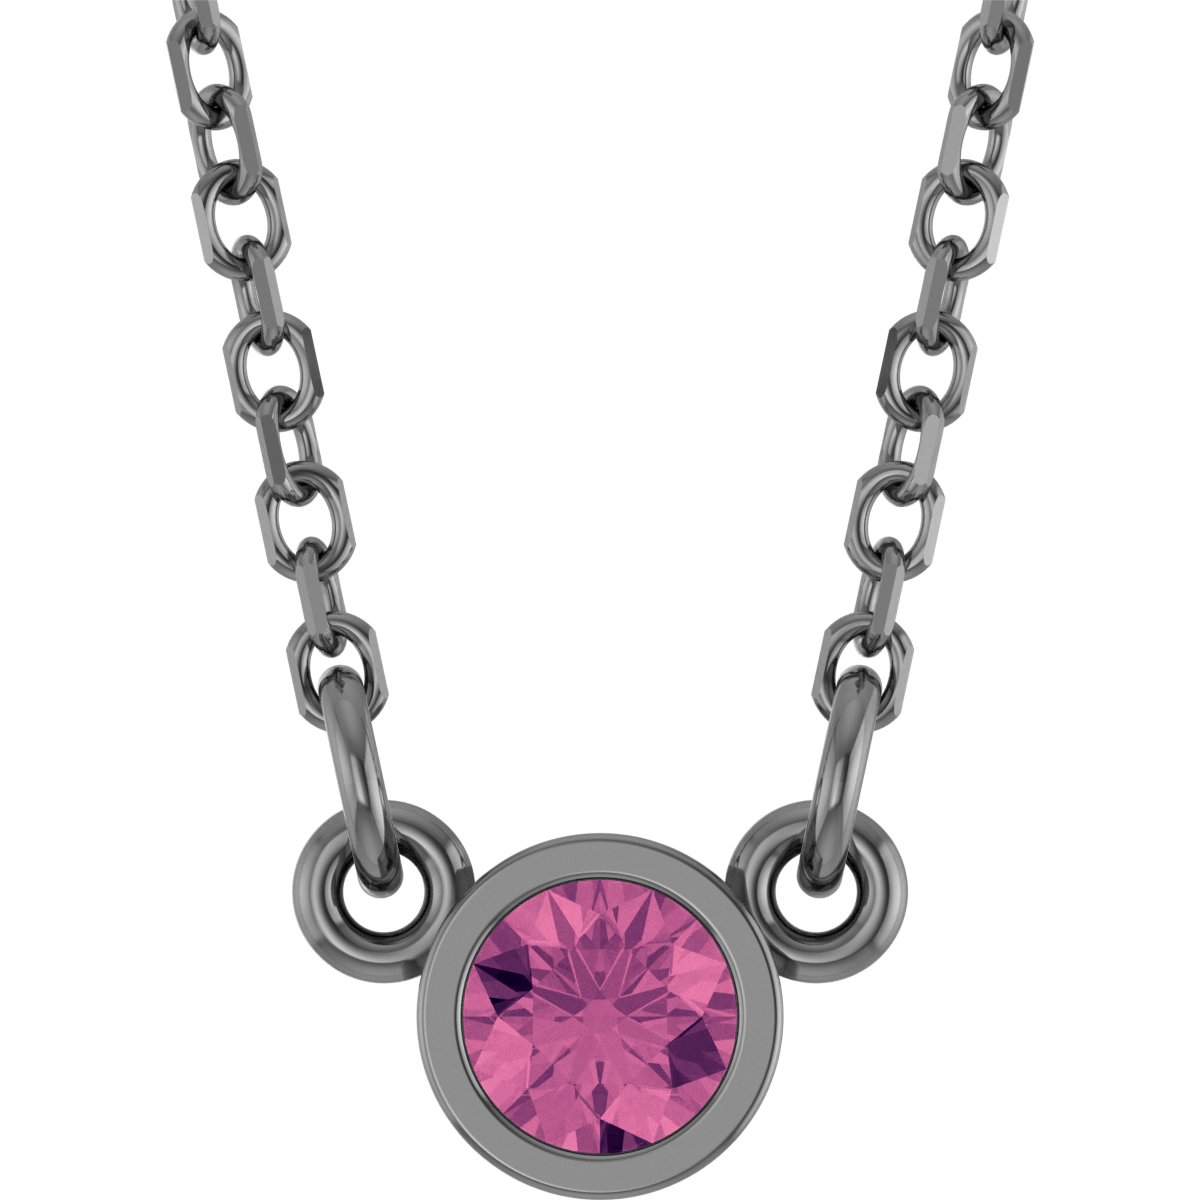 Rhodium-Plated Sterling Silver Imitation Pink Tourmaline Solitaire 16